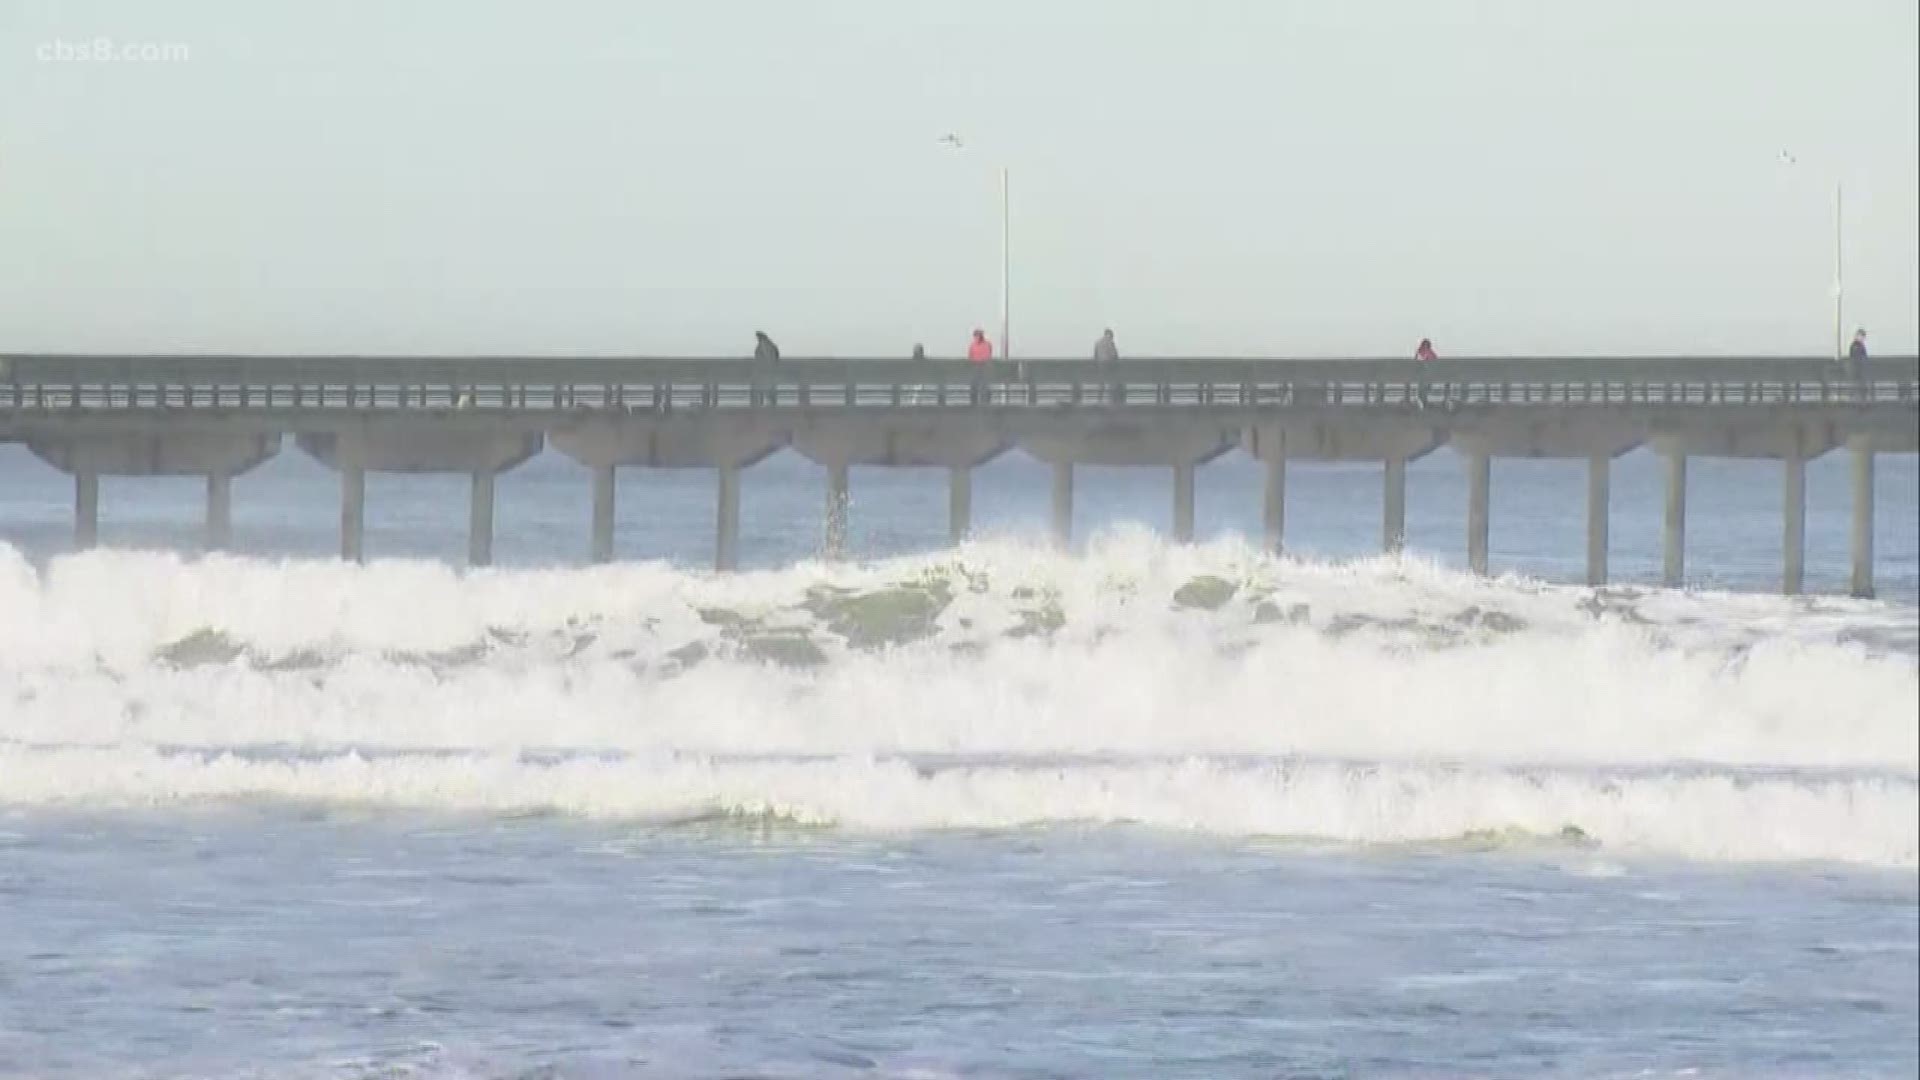 The National Weather Service in San Diego has issued a High Surf Advisory, which is in effect until 8 p.m. on Friday.